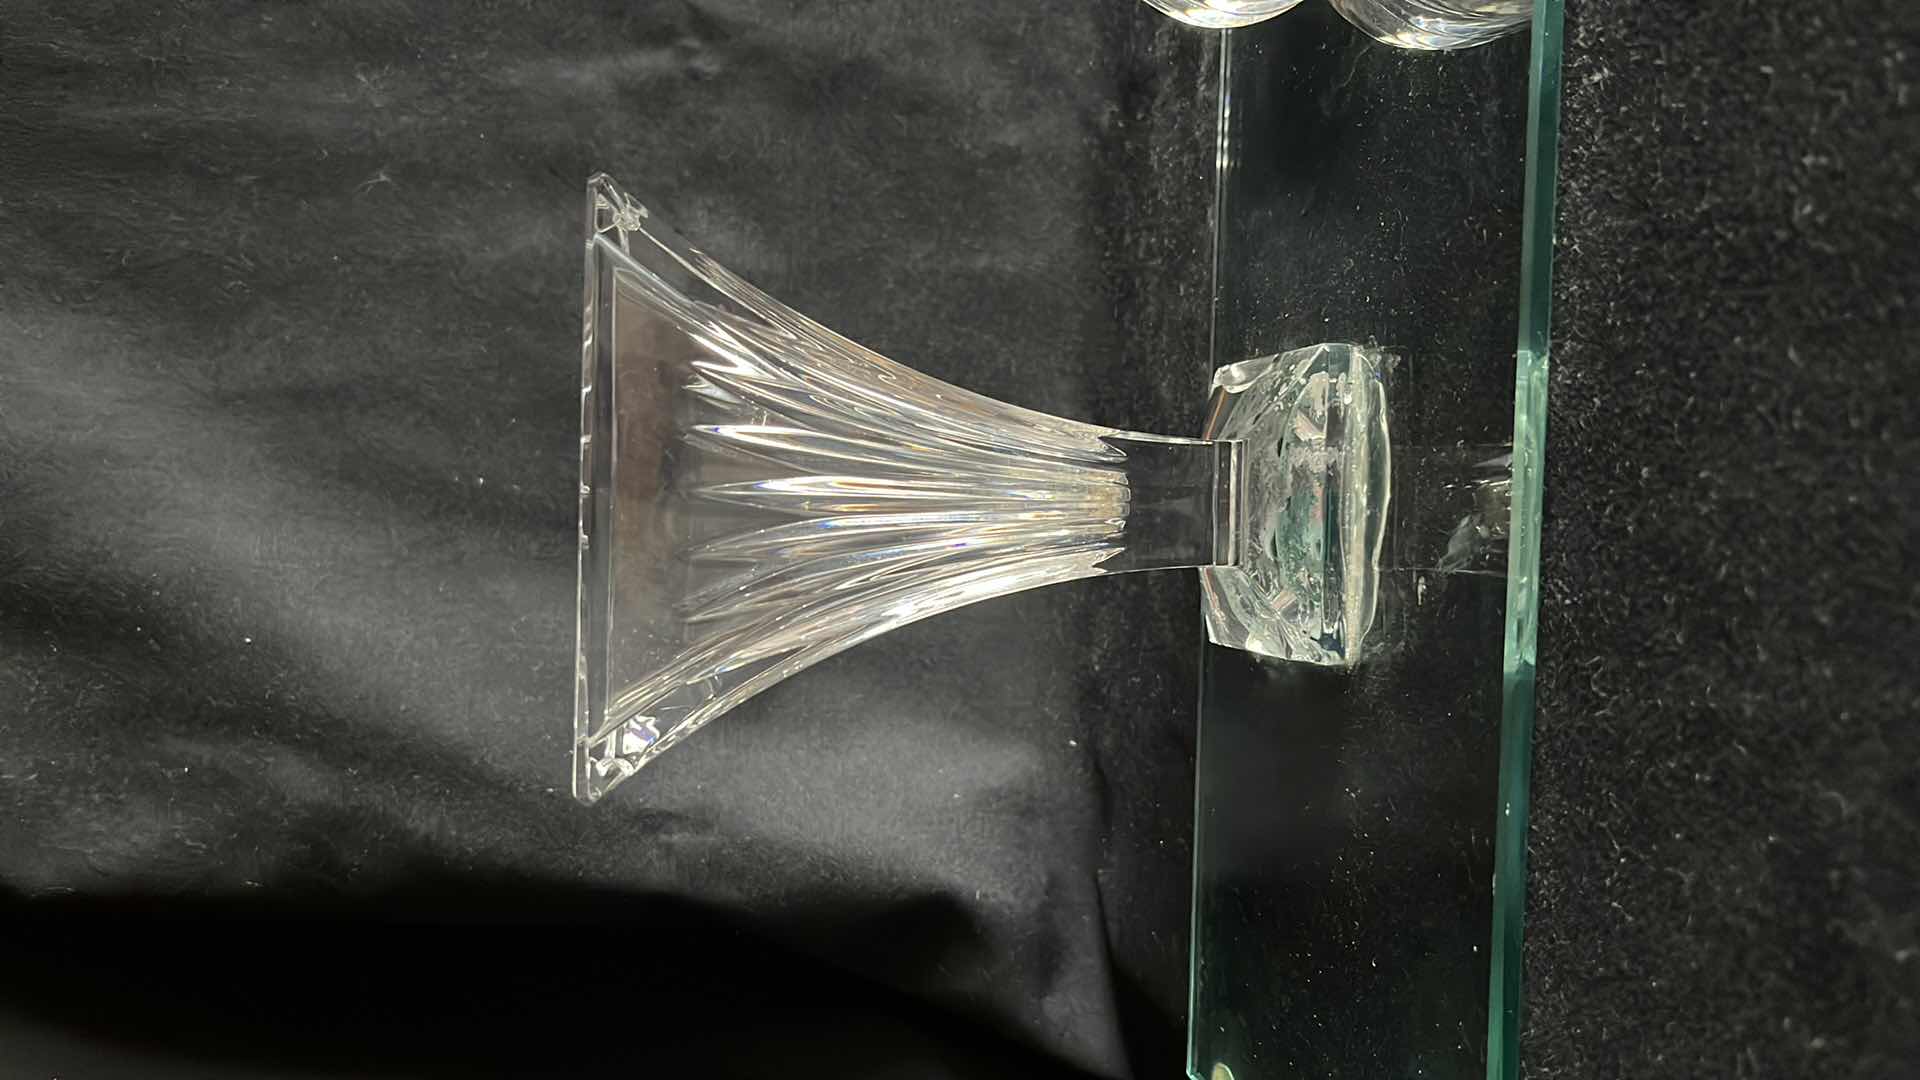 Photo 2 of WATERFORD CRYSTAL DISPLAY PIECES W ATTACHED GLASS 5.25” X 18.25” X 6.25”